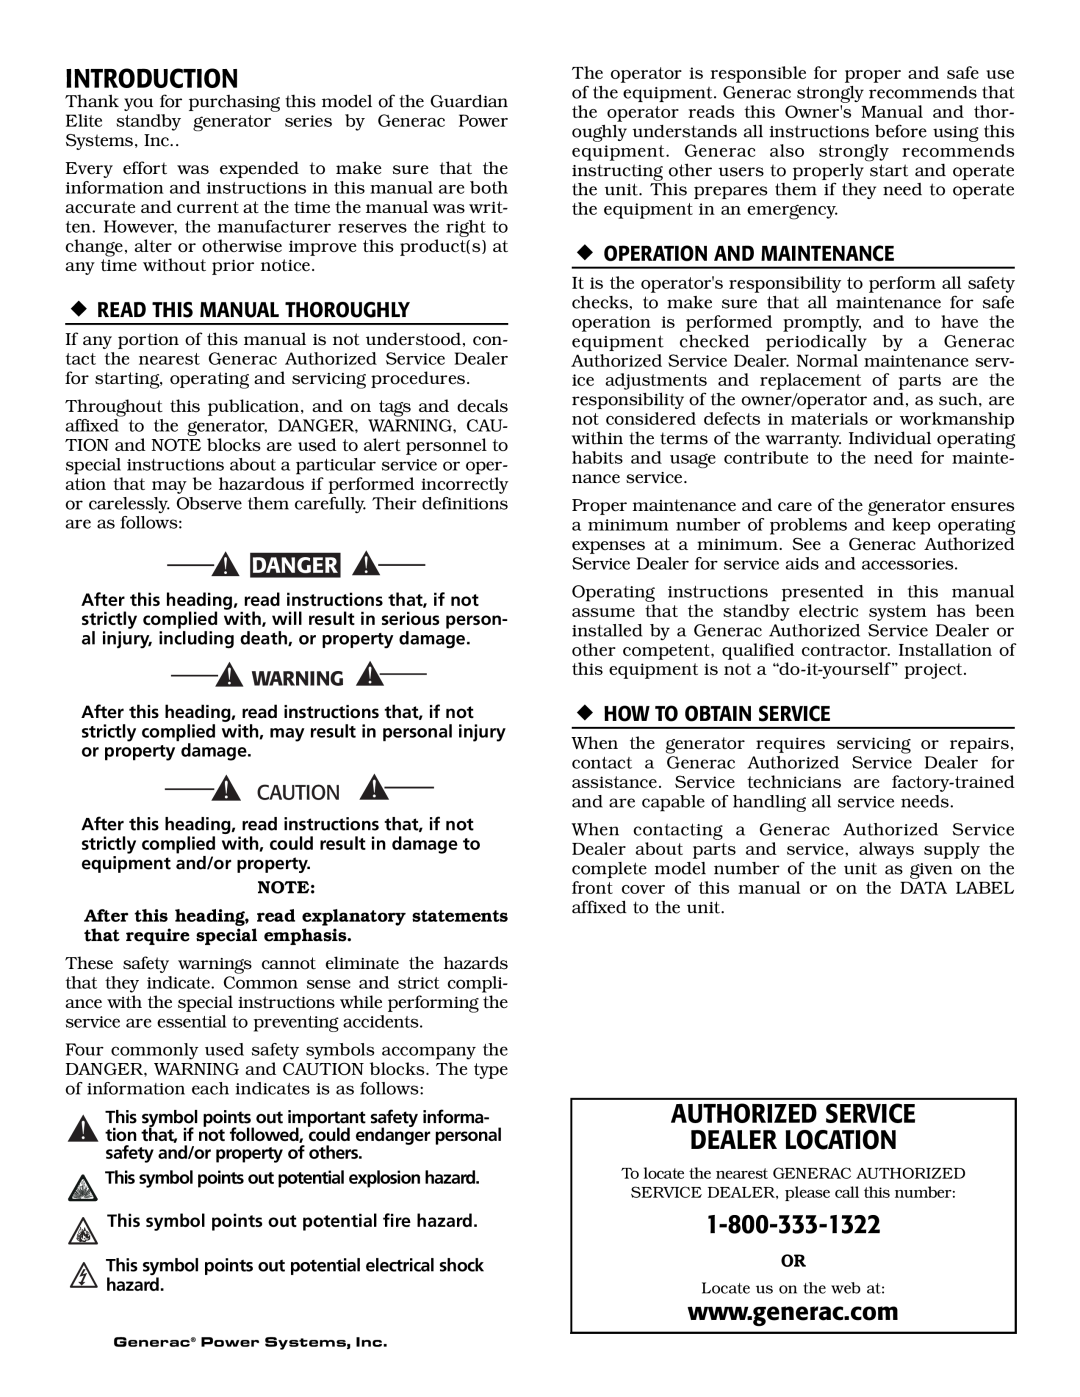 Generac Power Systems 005053-0 Introduction, Authorized Service Dealer Location, ‹ Read This Manual Thoroughly, Danger 